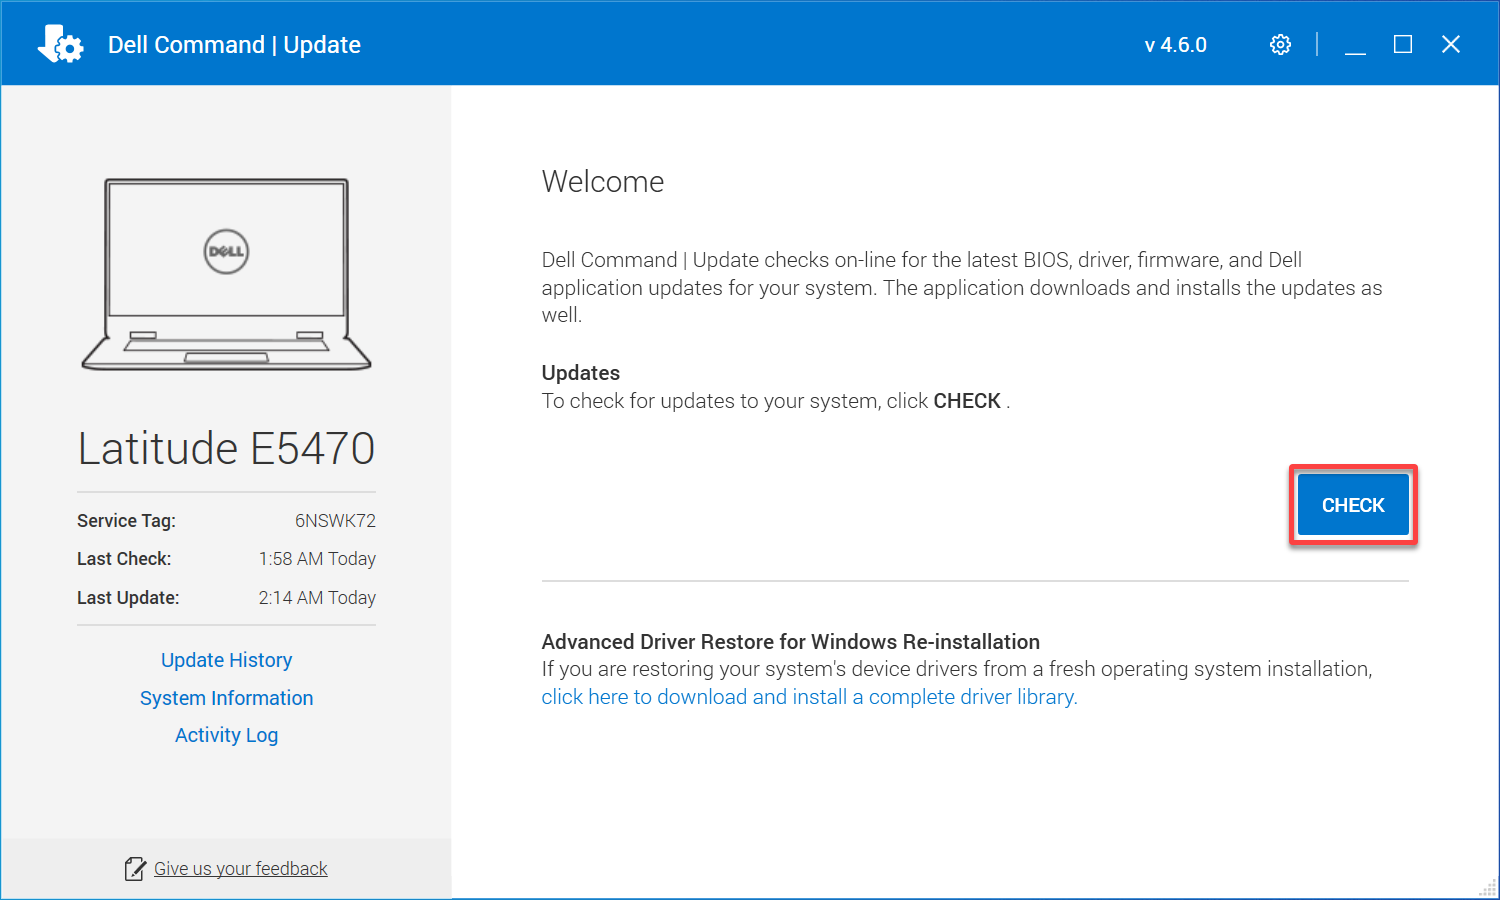 Checking for available updates with Dell Command Update